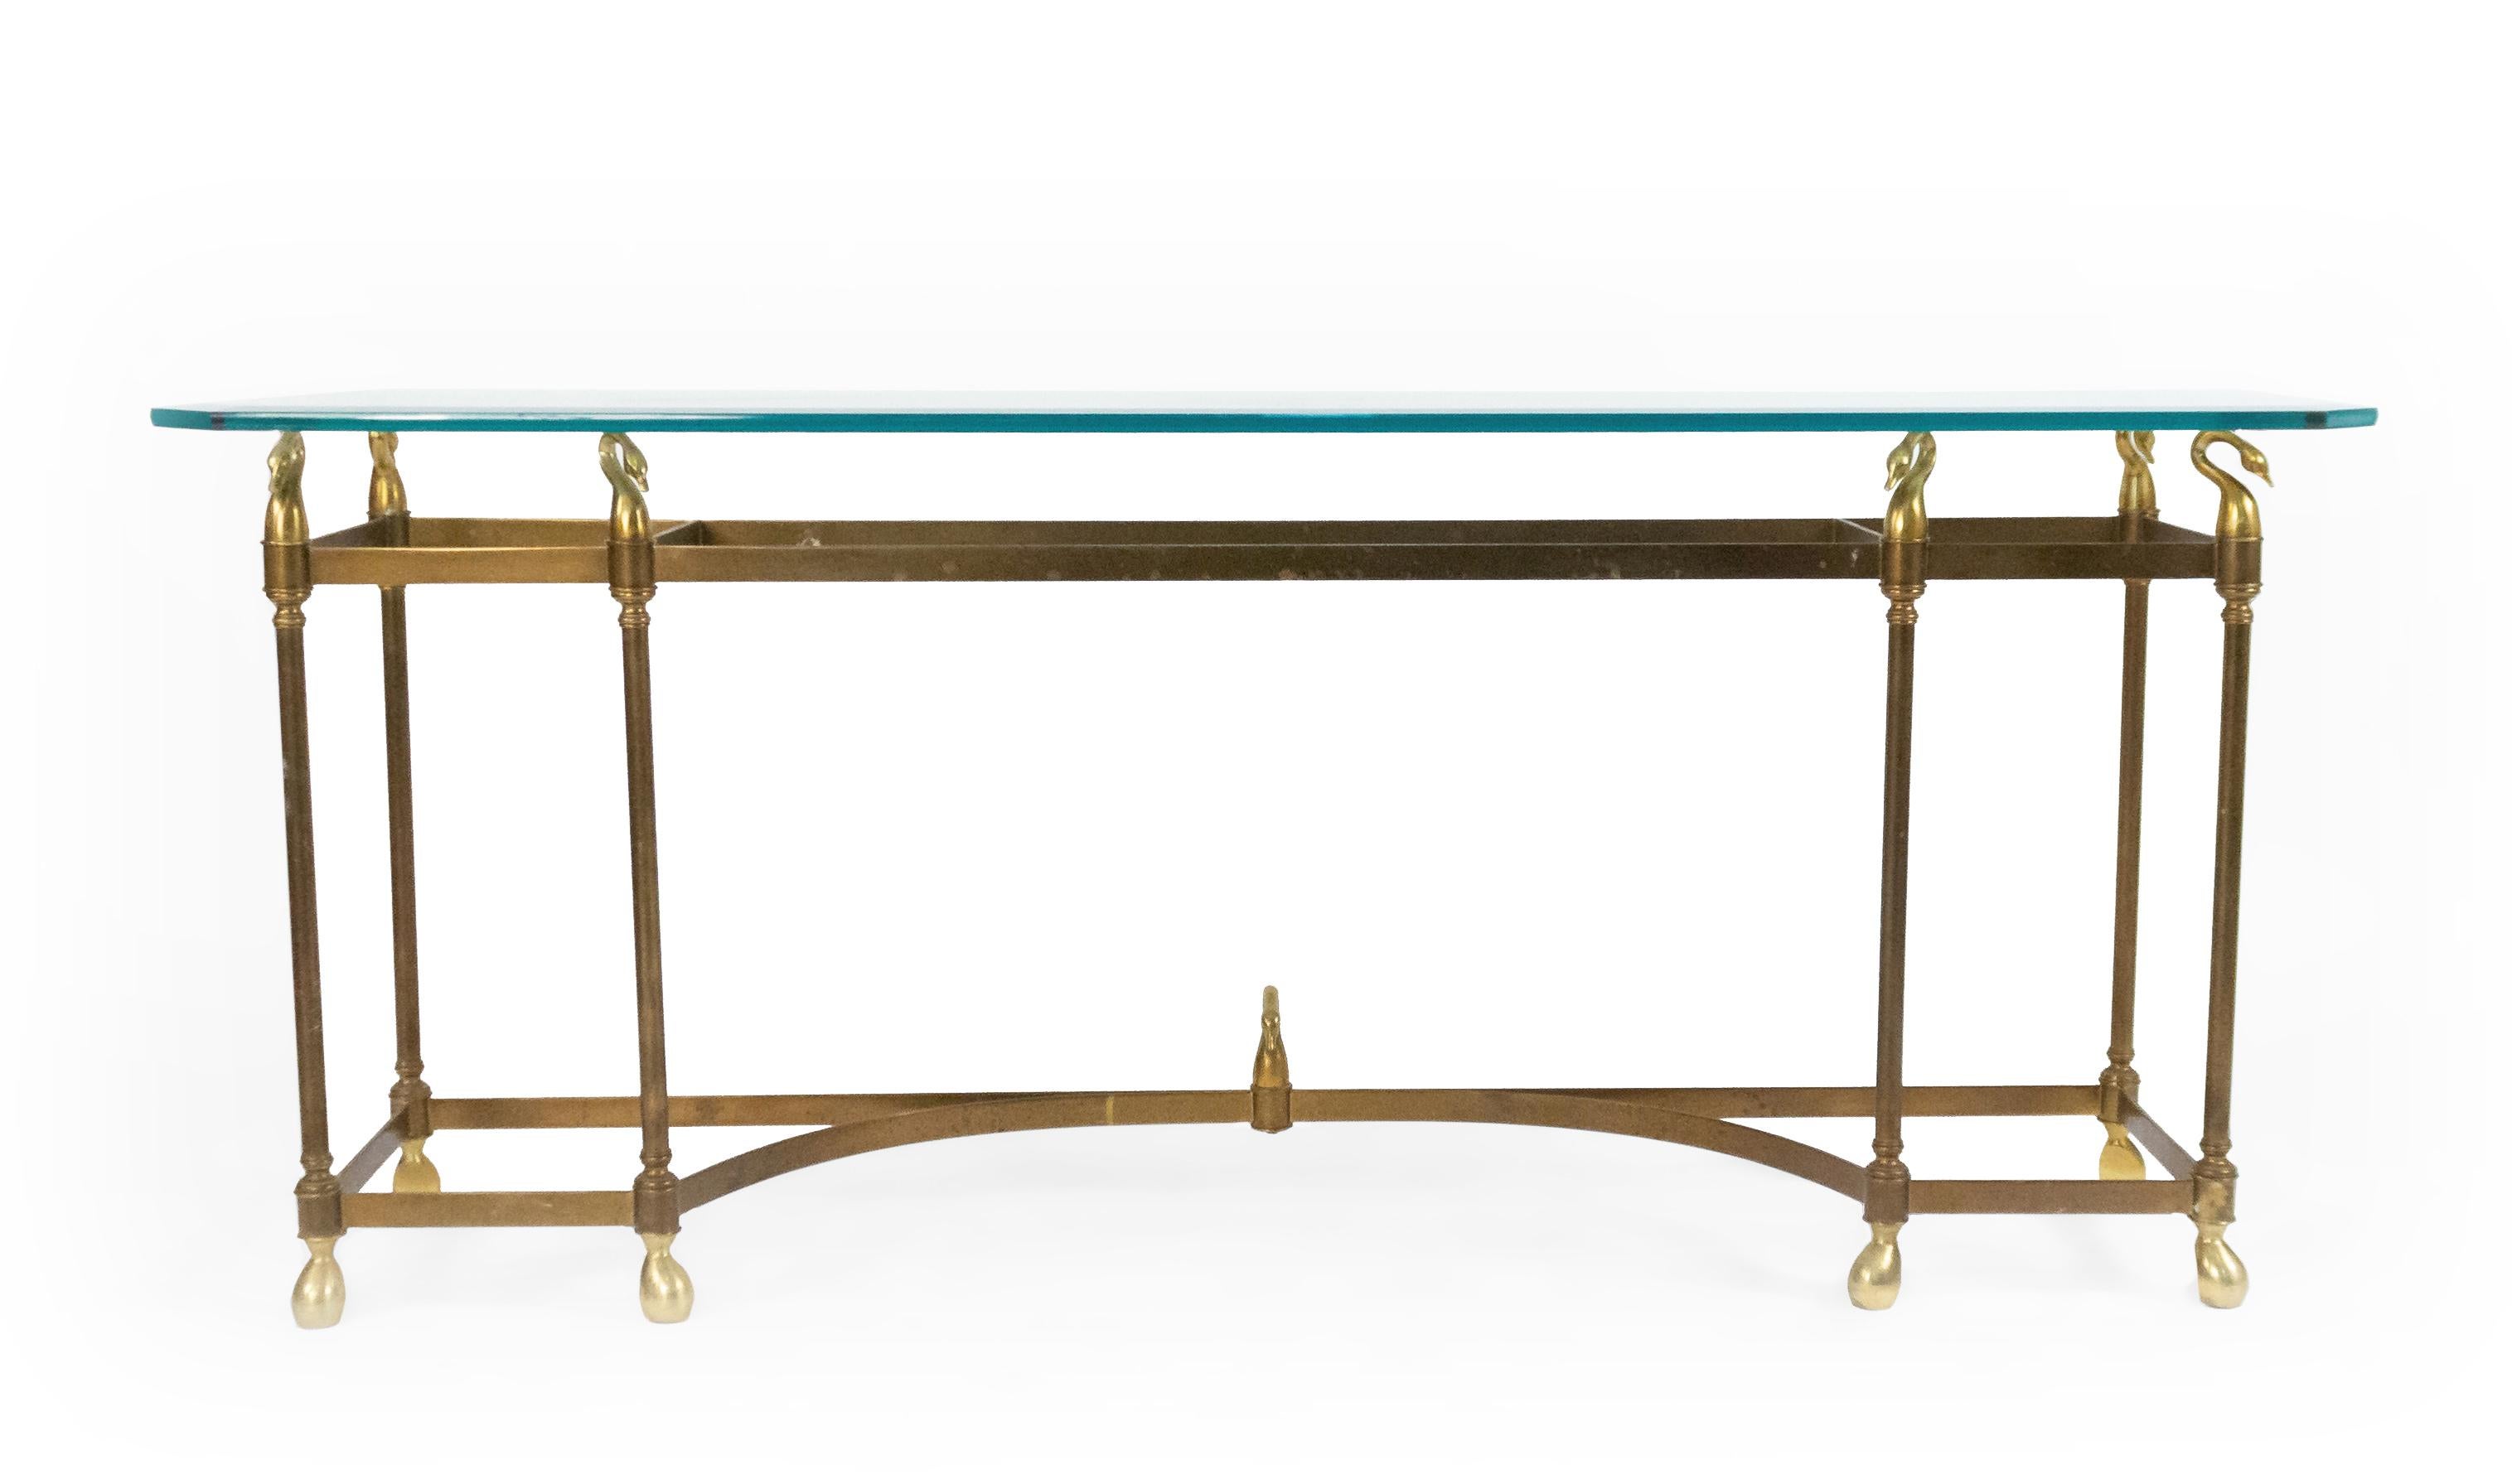 American Mid-20th Century (Hollywood Regency) brass console table with 6 legs and a glass top supported by swan finials with a stretcher base. (attributed to La Barge)